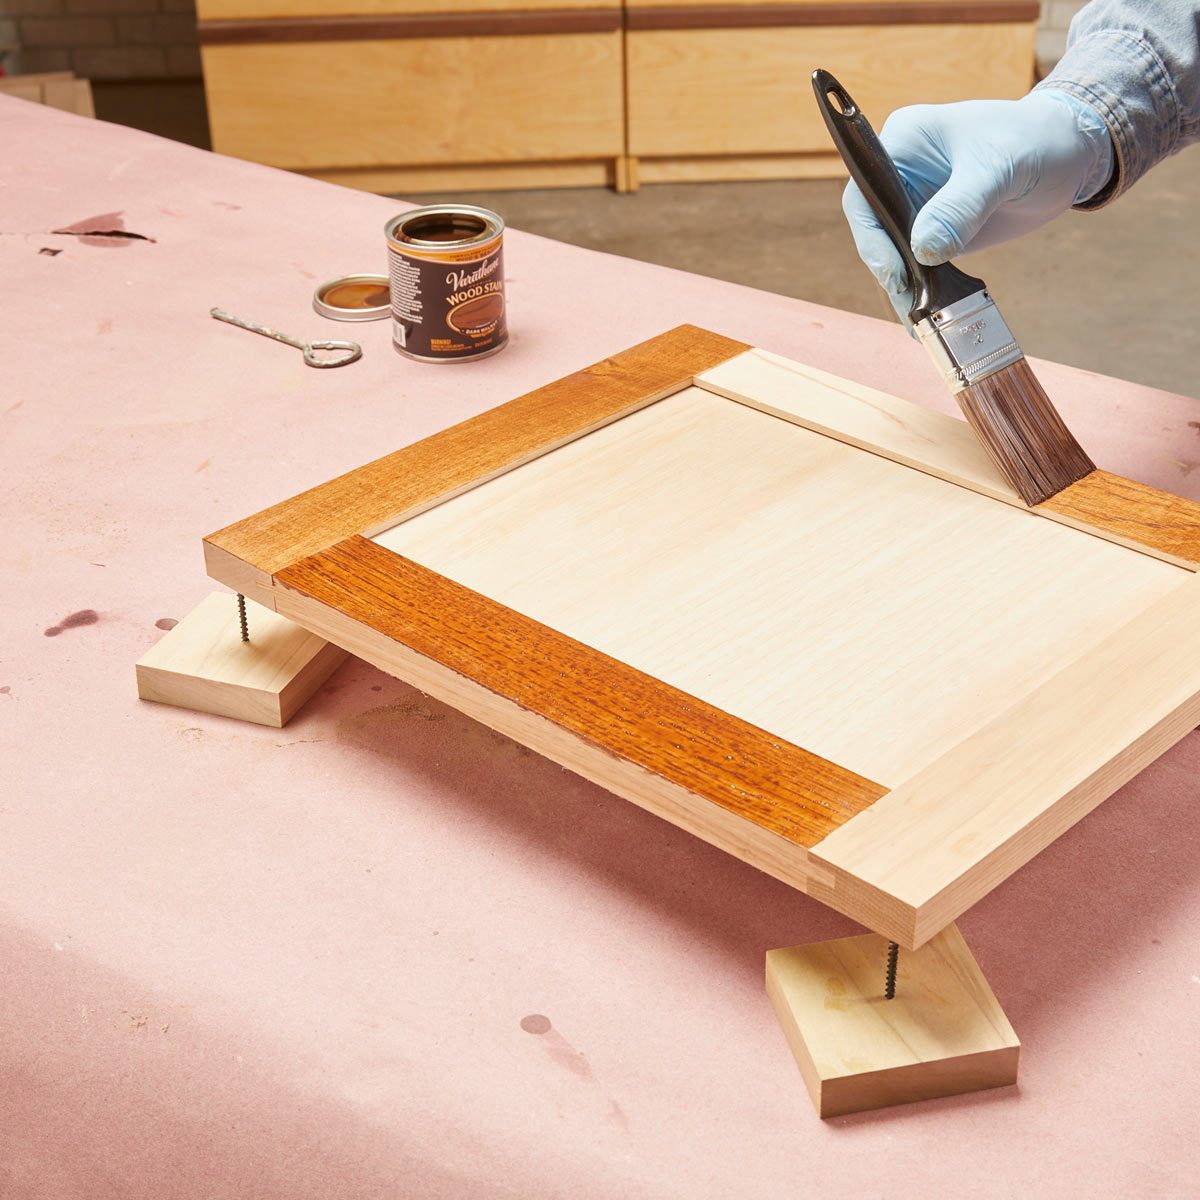 56 Brilliant Woodworking Tips for Beginners